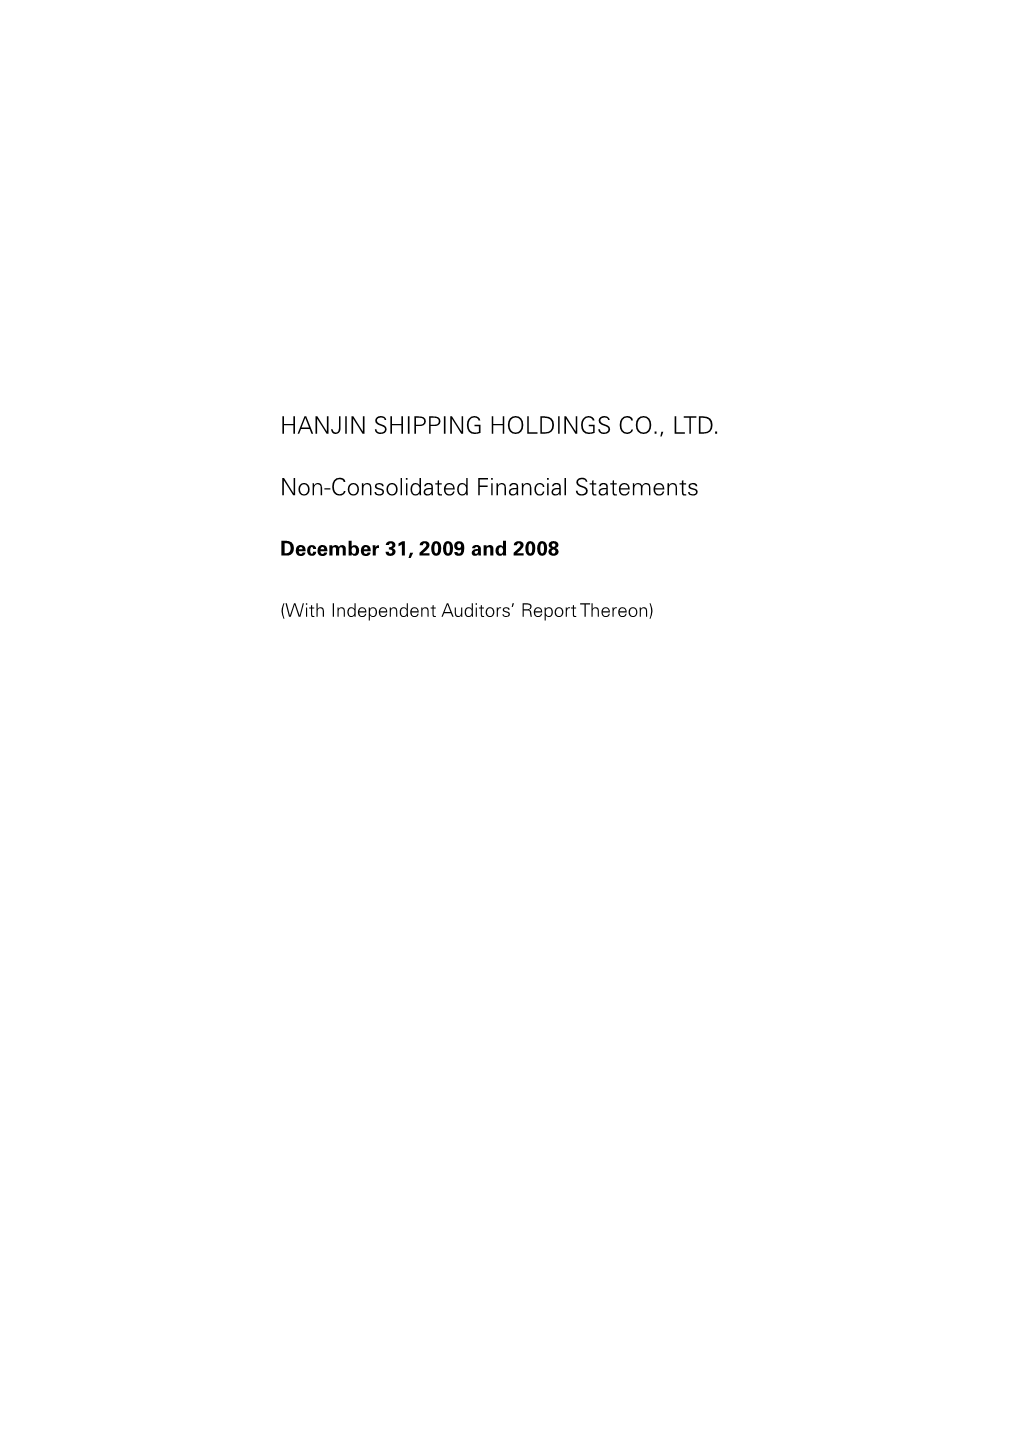 HANJIN SHIPPING HOLDINGS CO., LTD. Non-Consolidated Financial